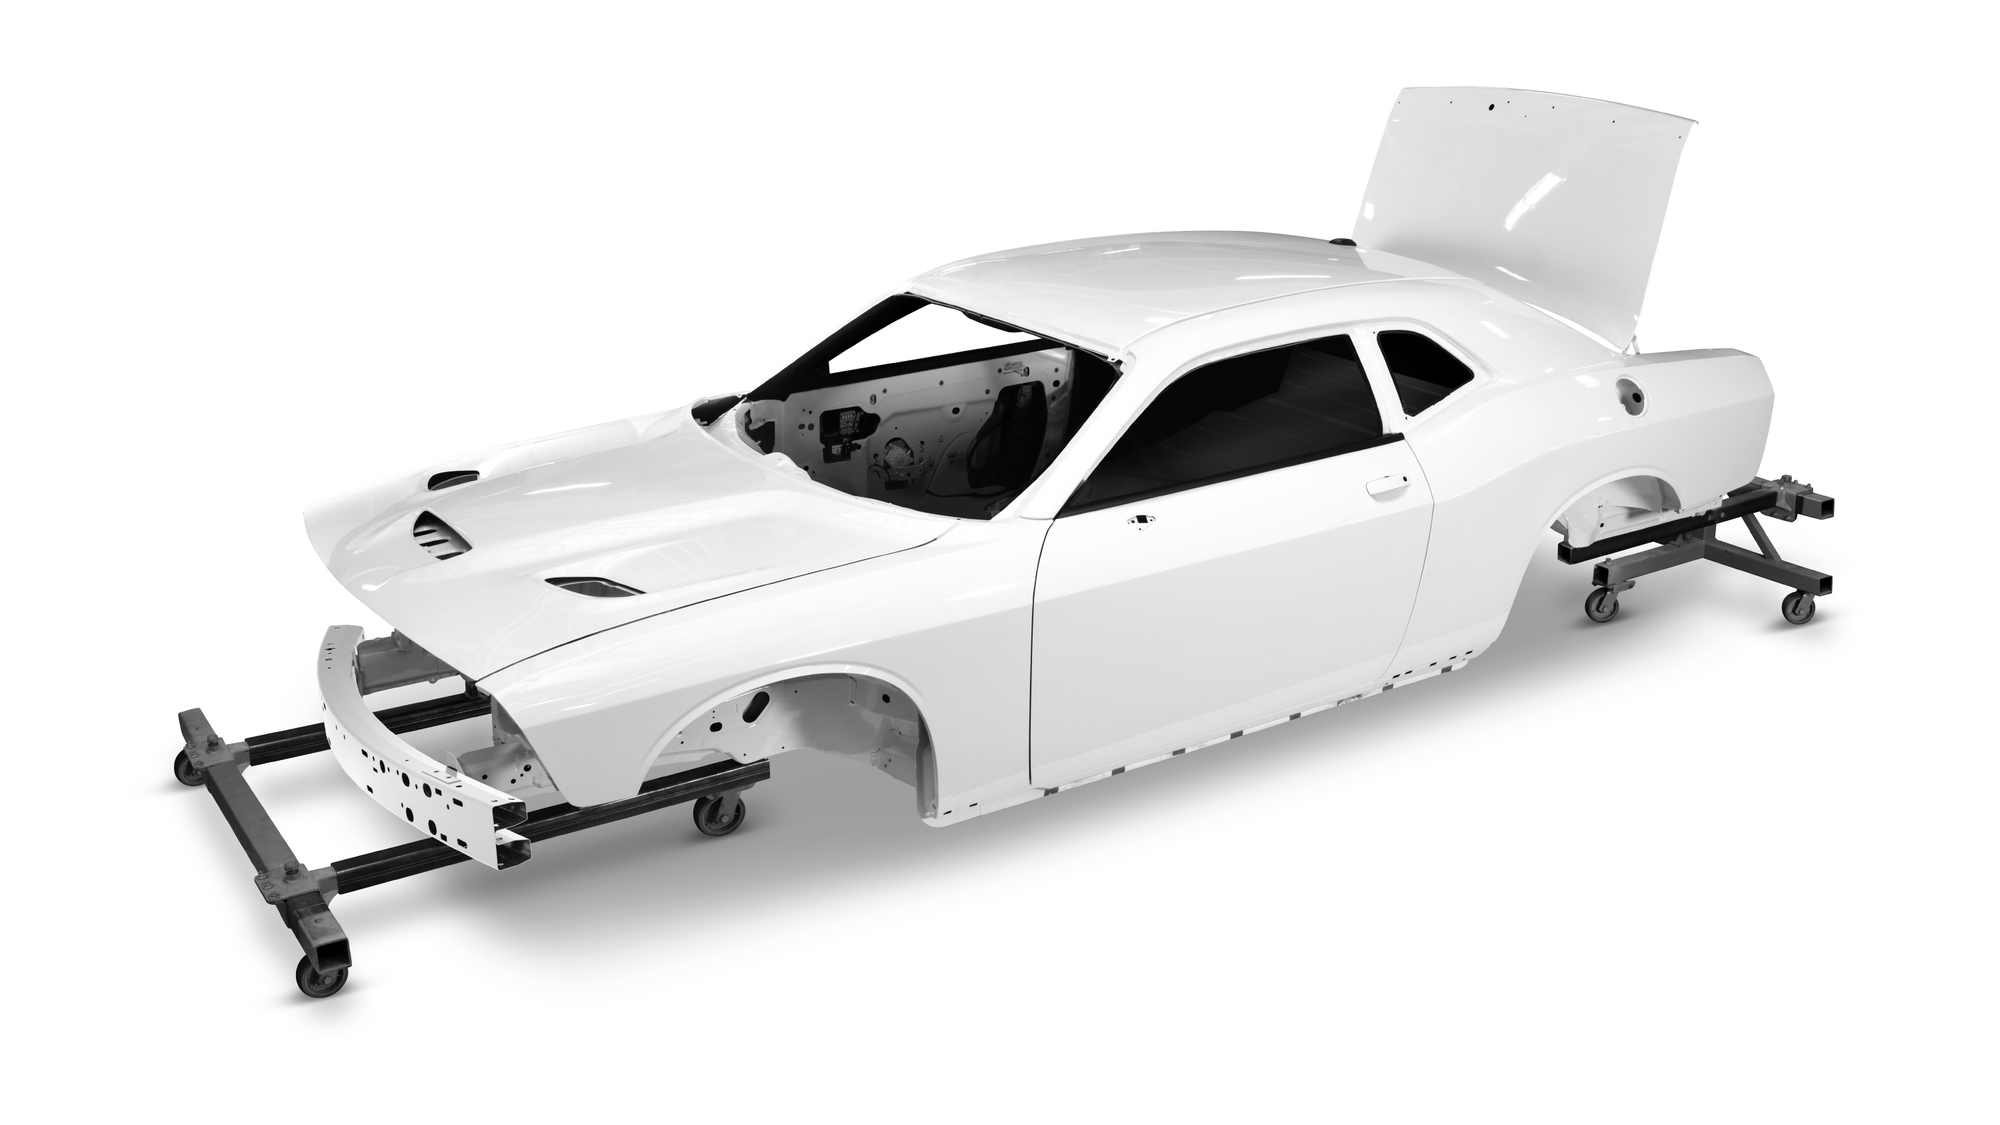 Direct Connection Dodge Challenger body-in-white